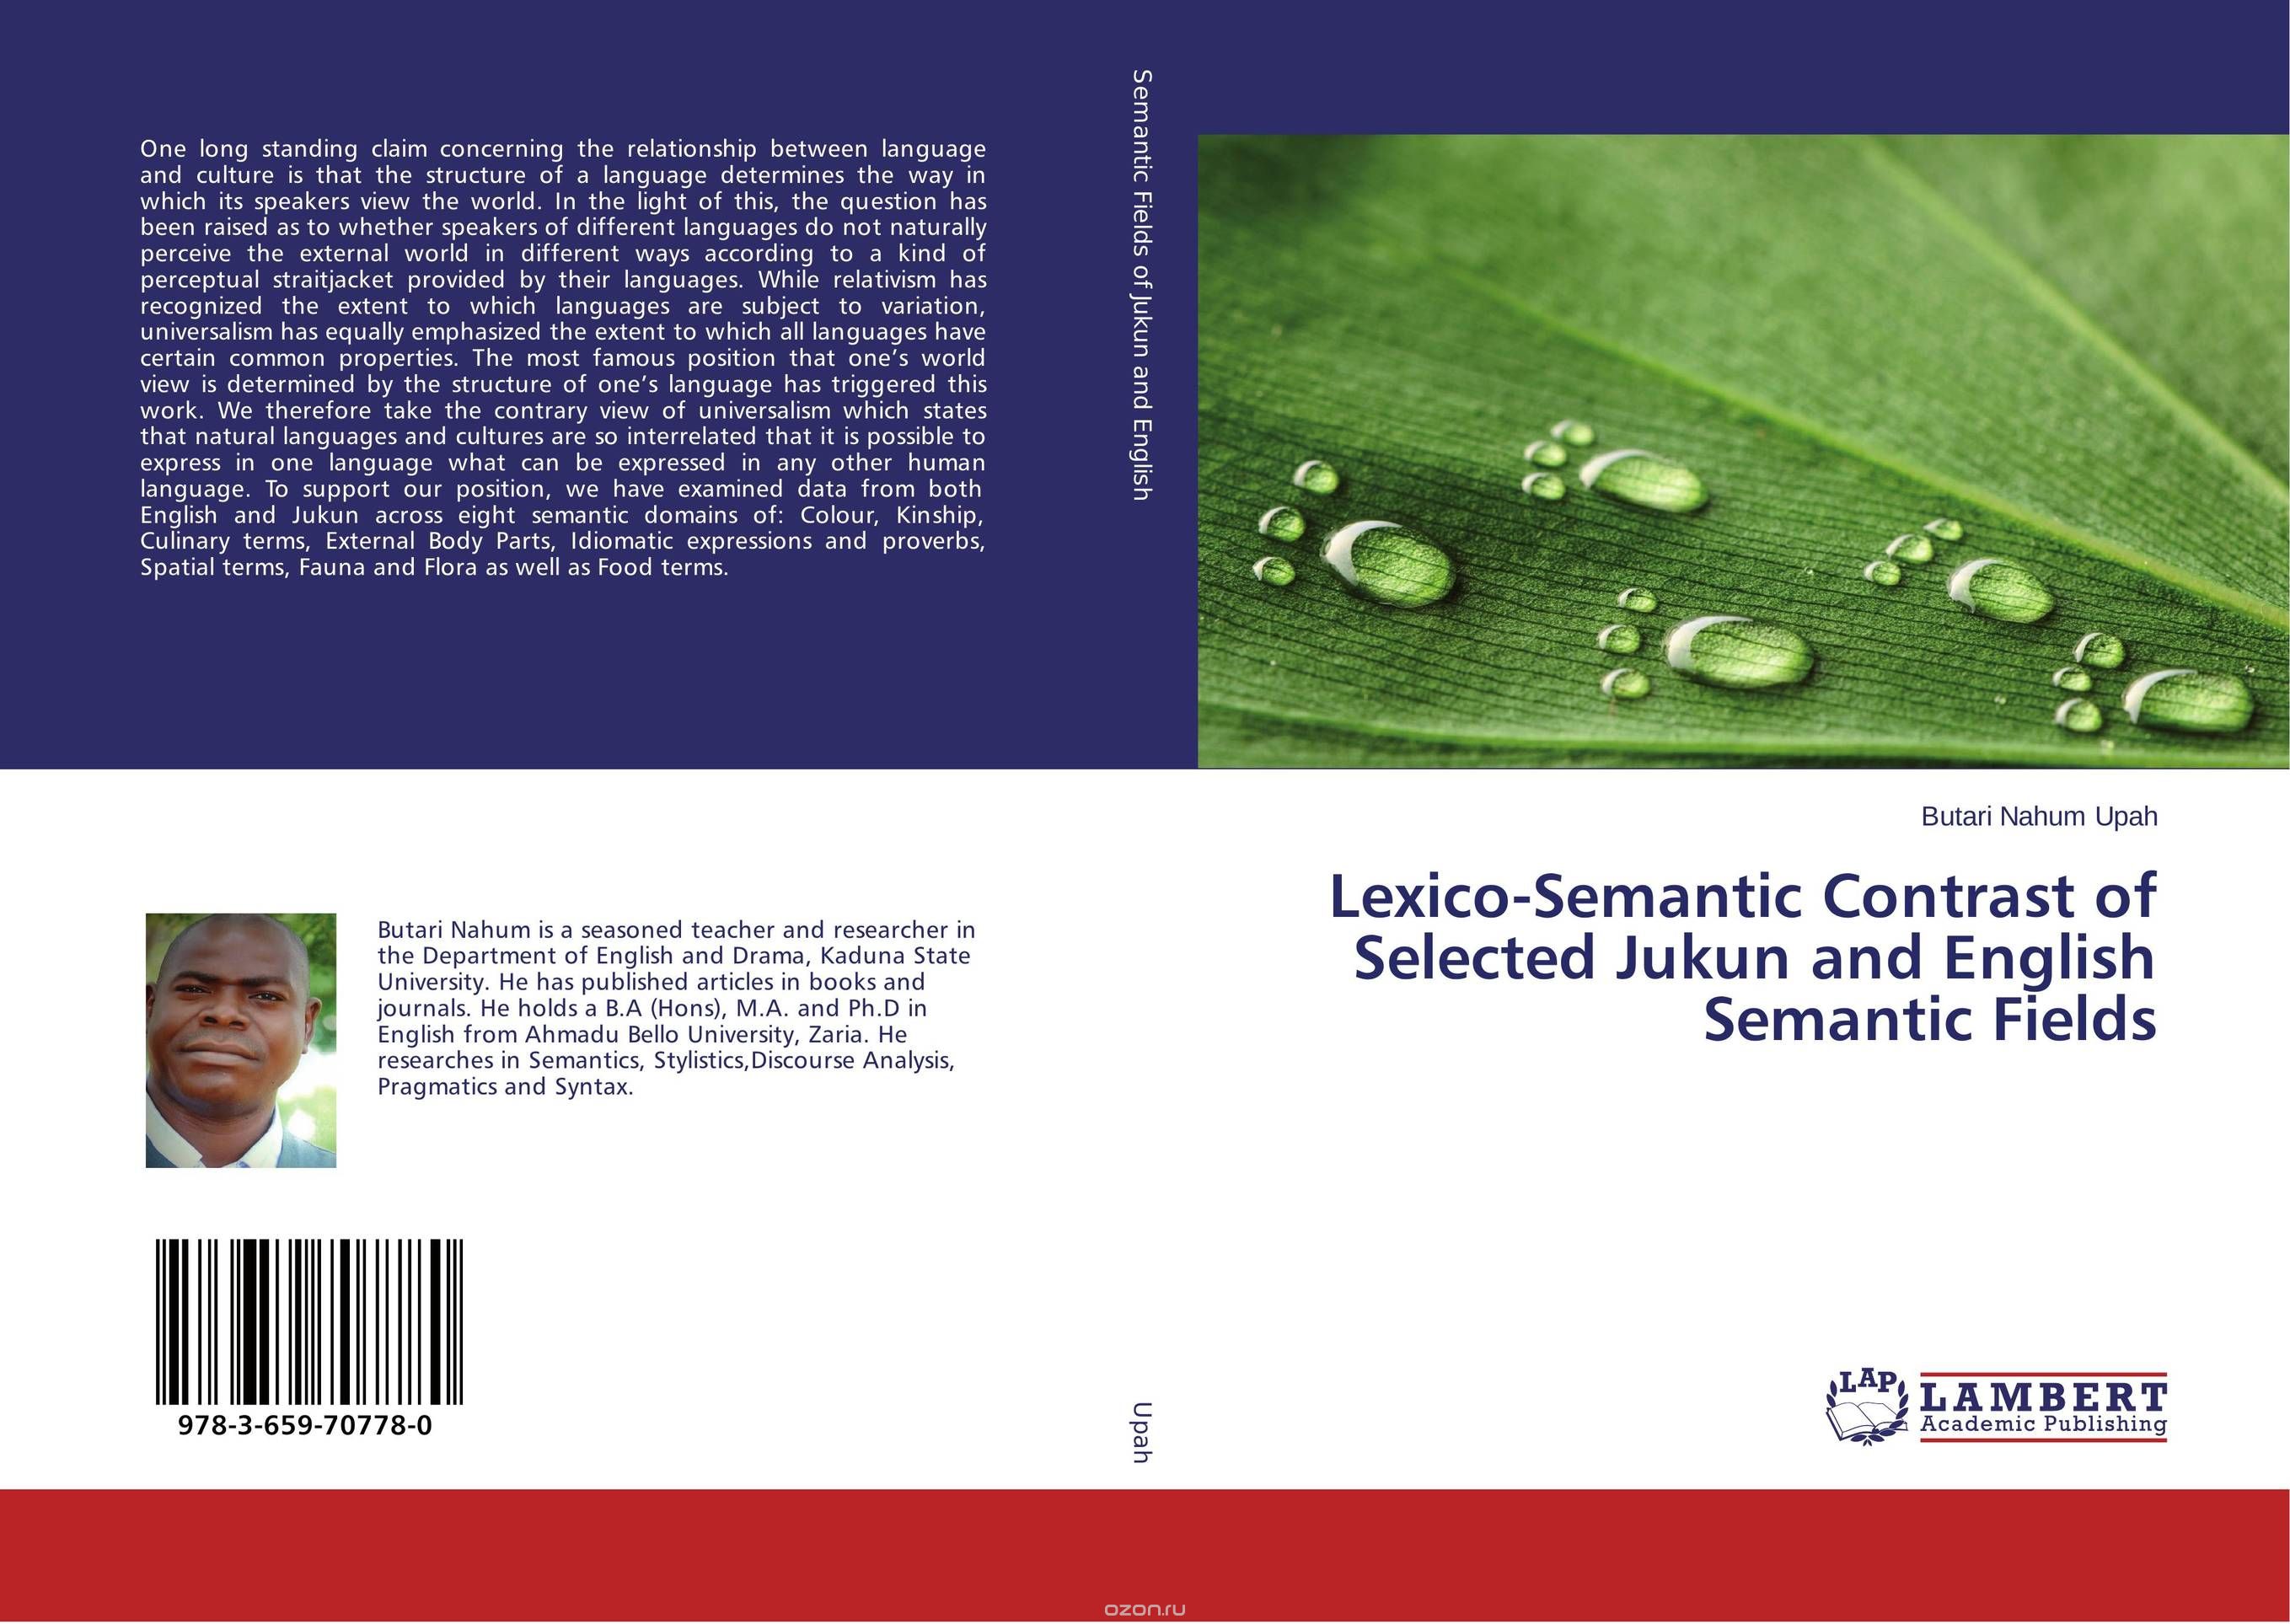 Lexico-Semantic Contrast of Selected Jukun and English Semantic Fields